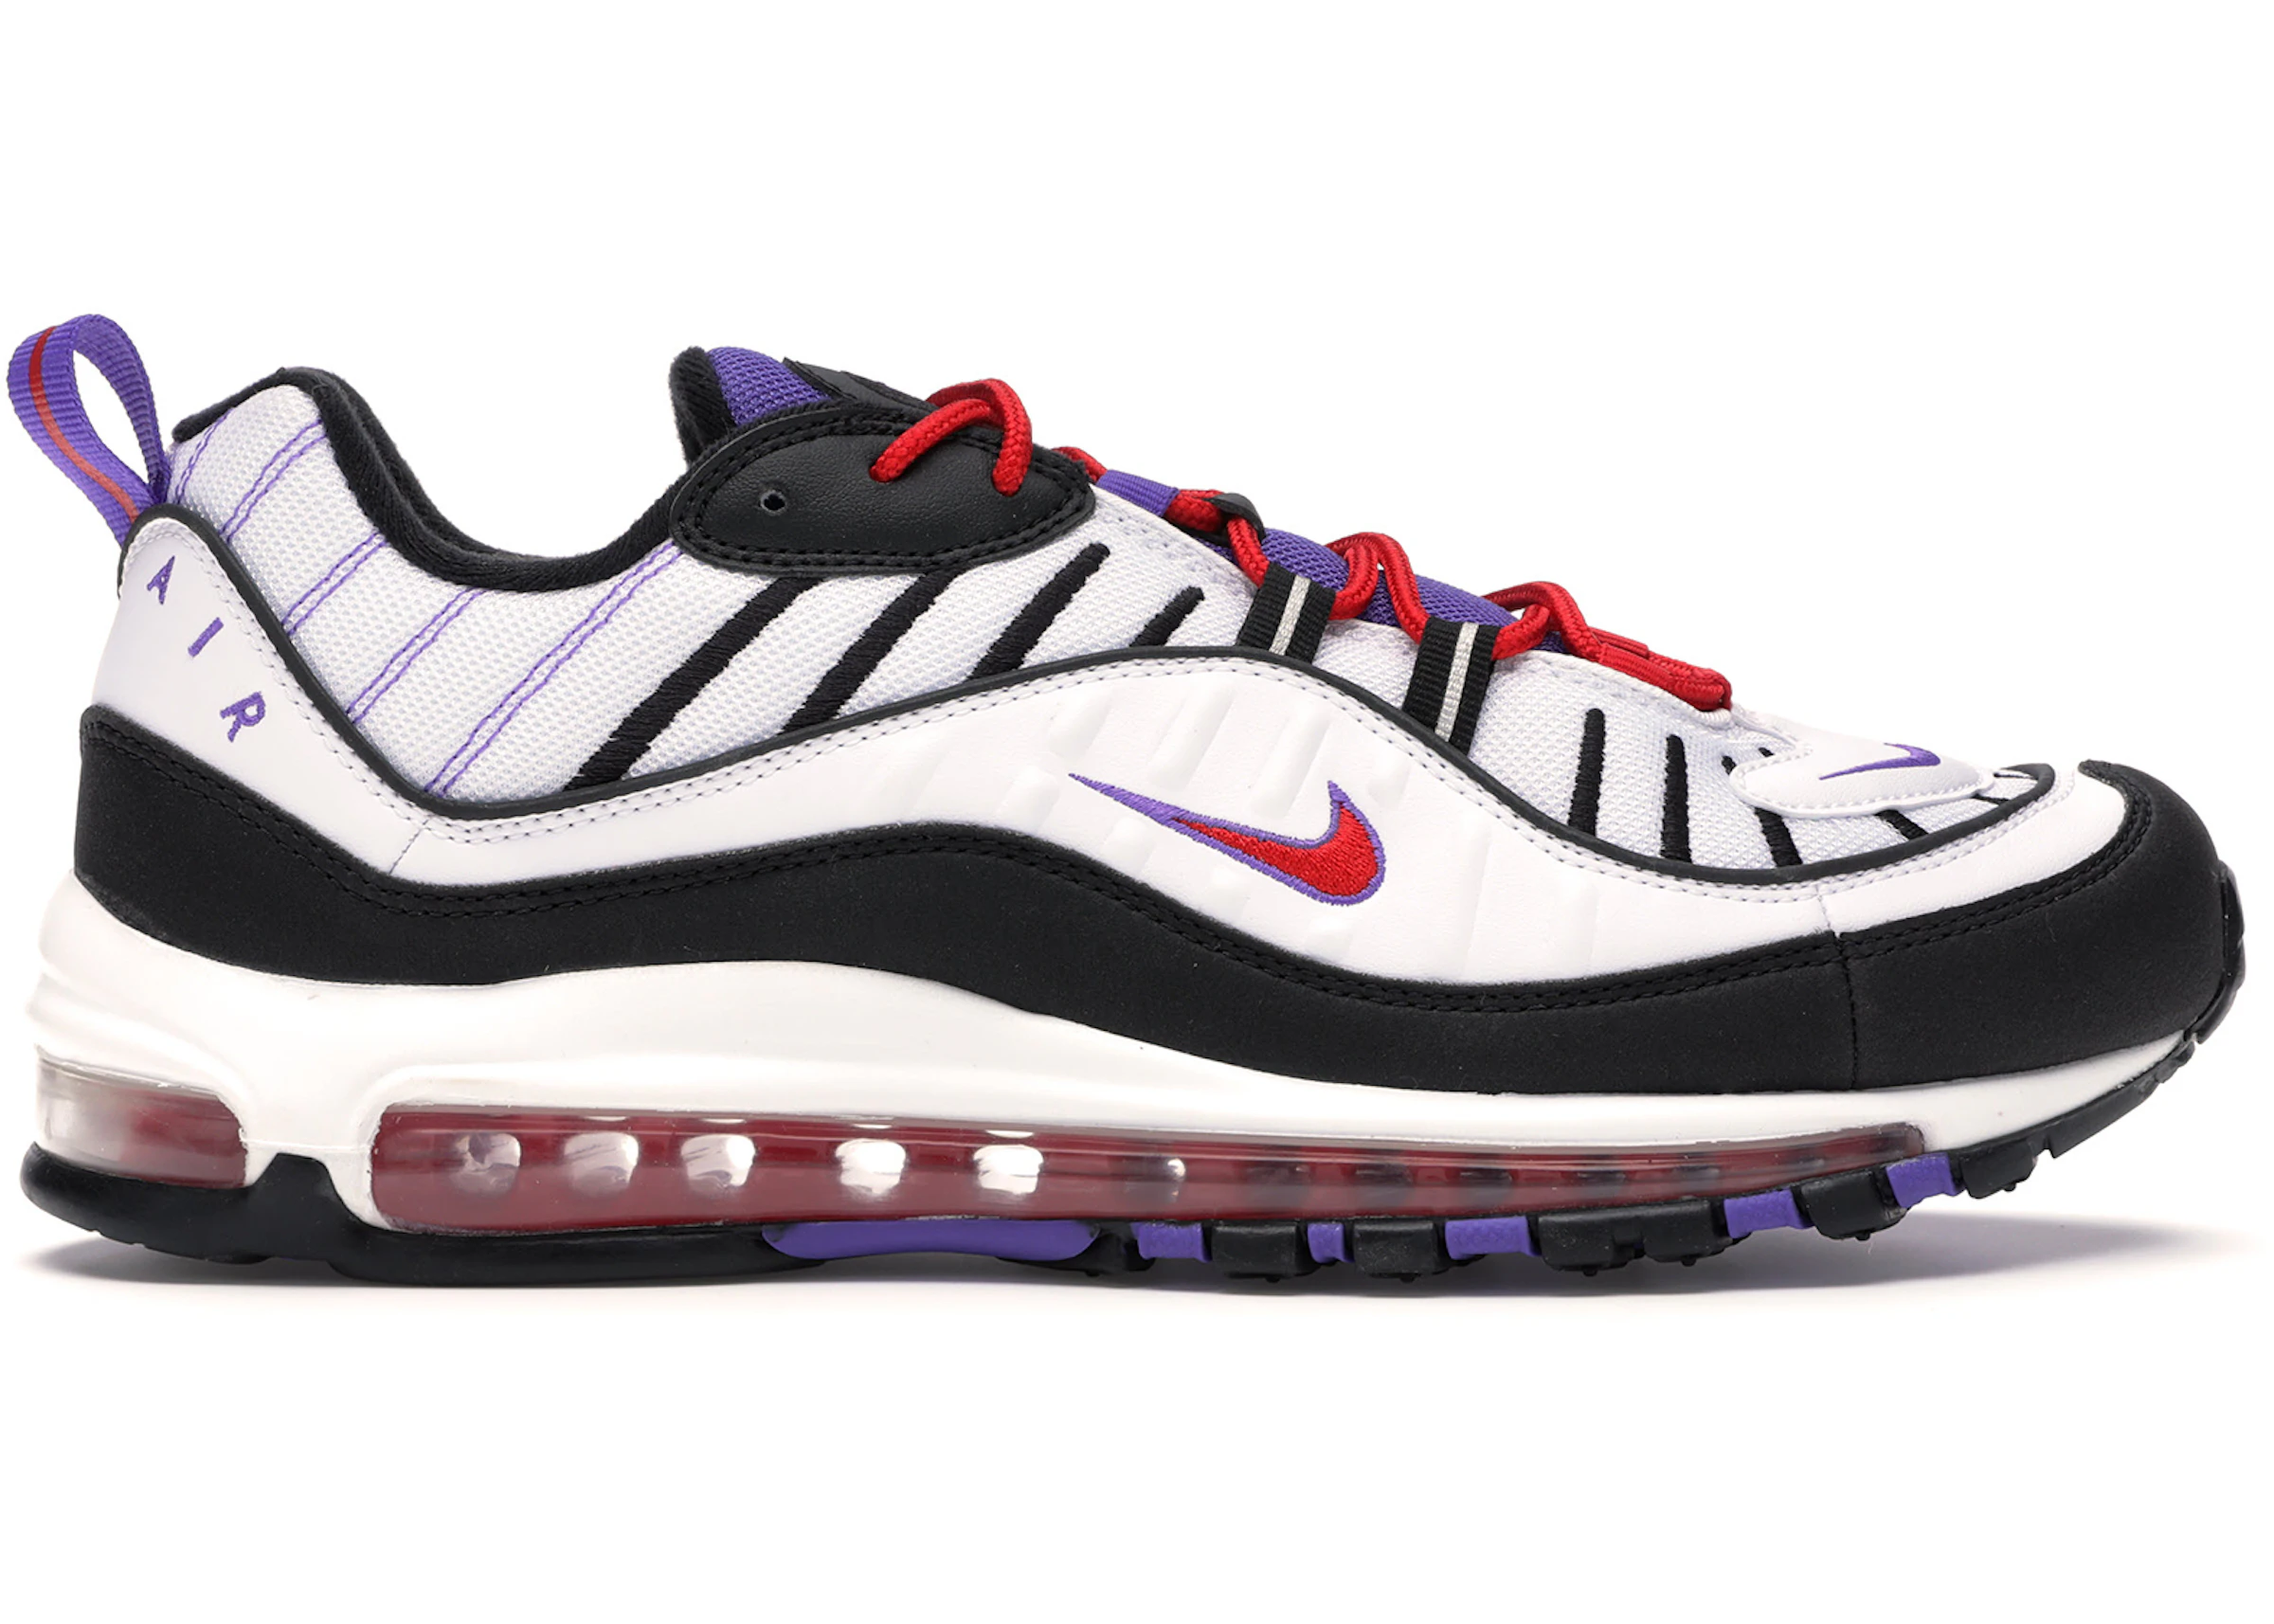 Accidental Towing oasis Buy Nike Air Max 98 Shoes & New Sneakers - StockX